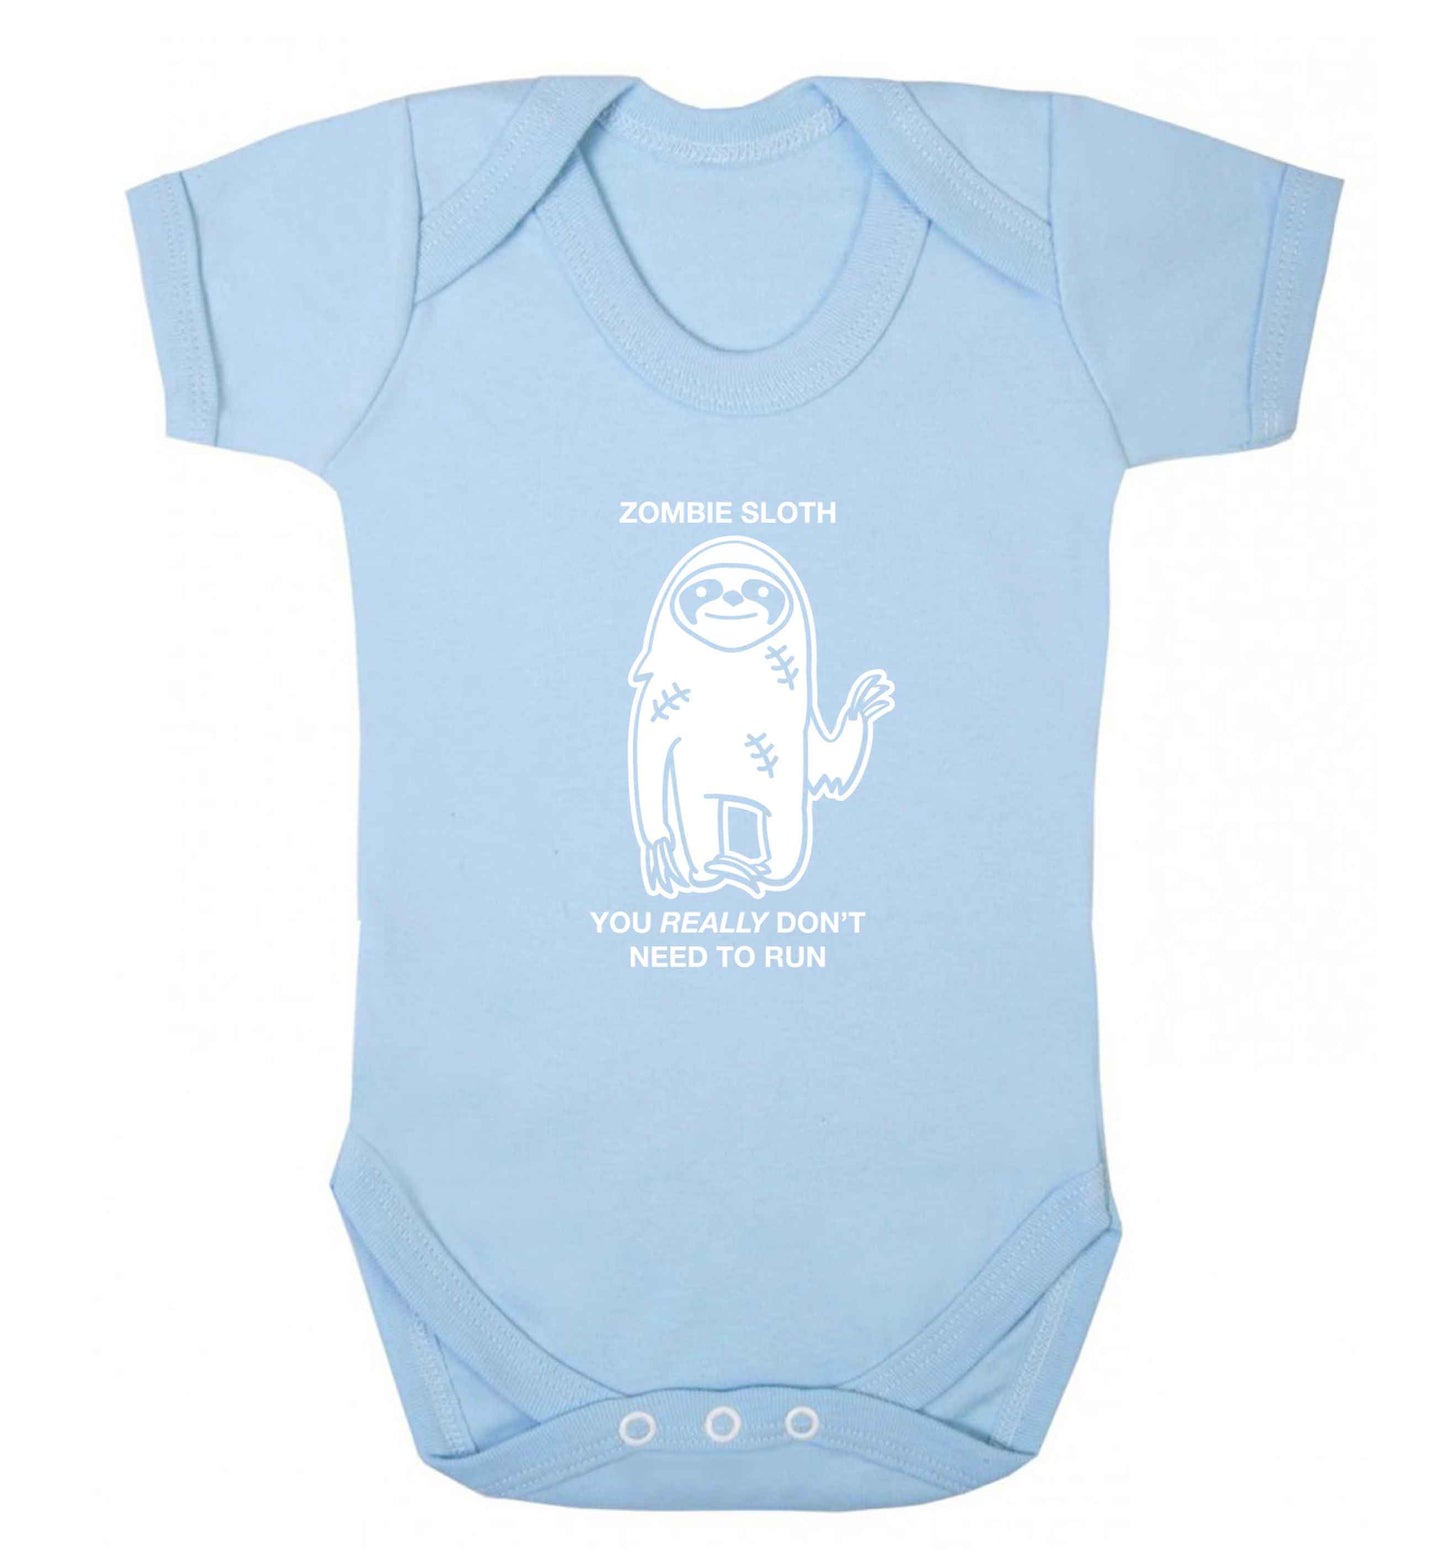 Zombie sloth you really don't need to run baby vest pale blue 18-24 months